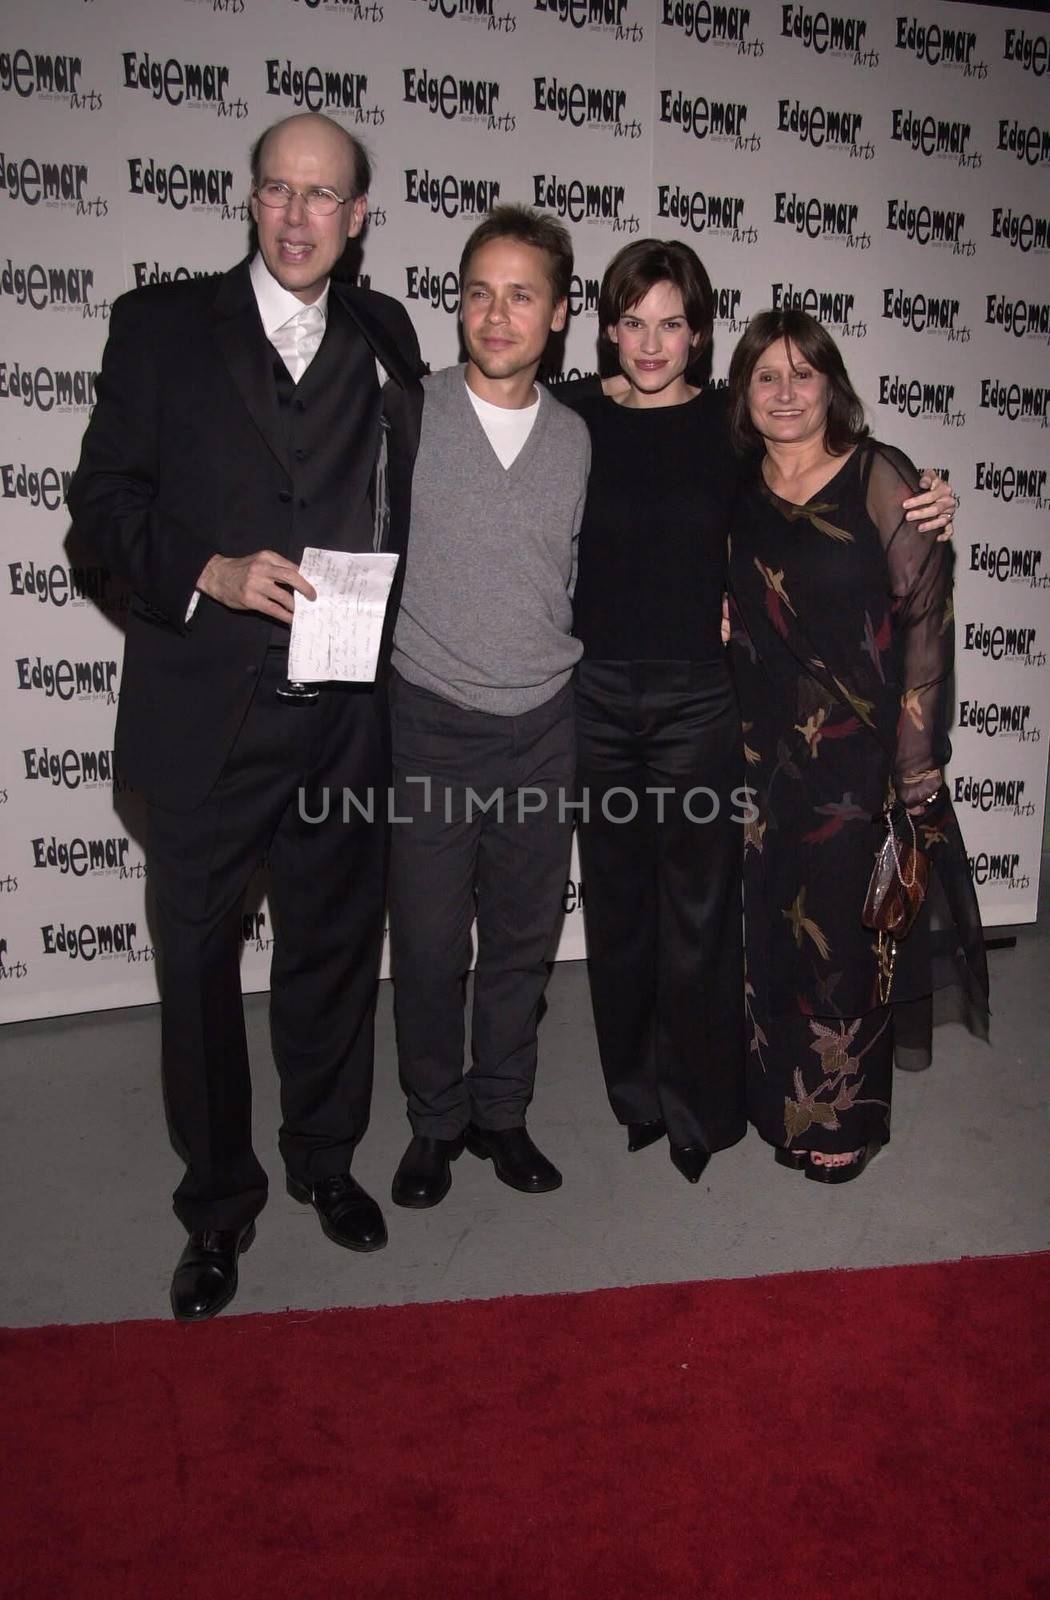 Larry Moss, Chad Lowe, Hilary Swank and friend Holly at the "Starry Starry Night" fundraiser to benefit the Edgemar Center for the Arts. Santa Monica, 04-15-00